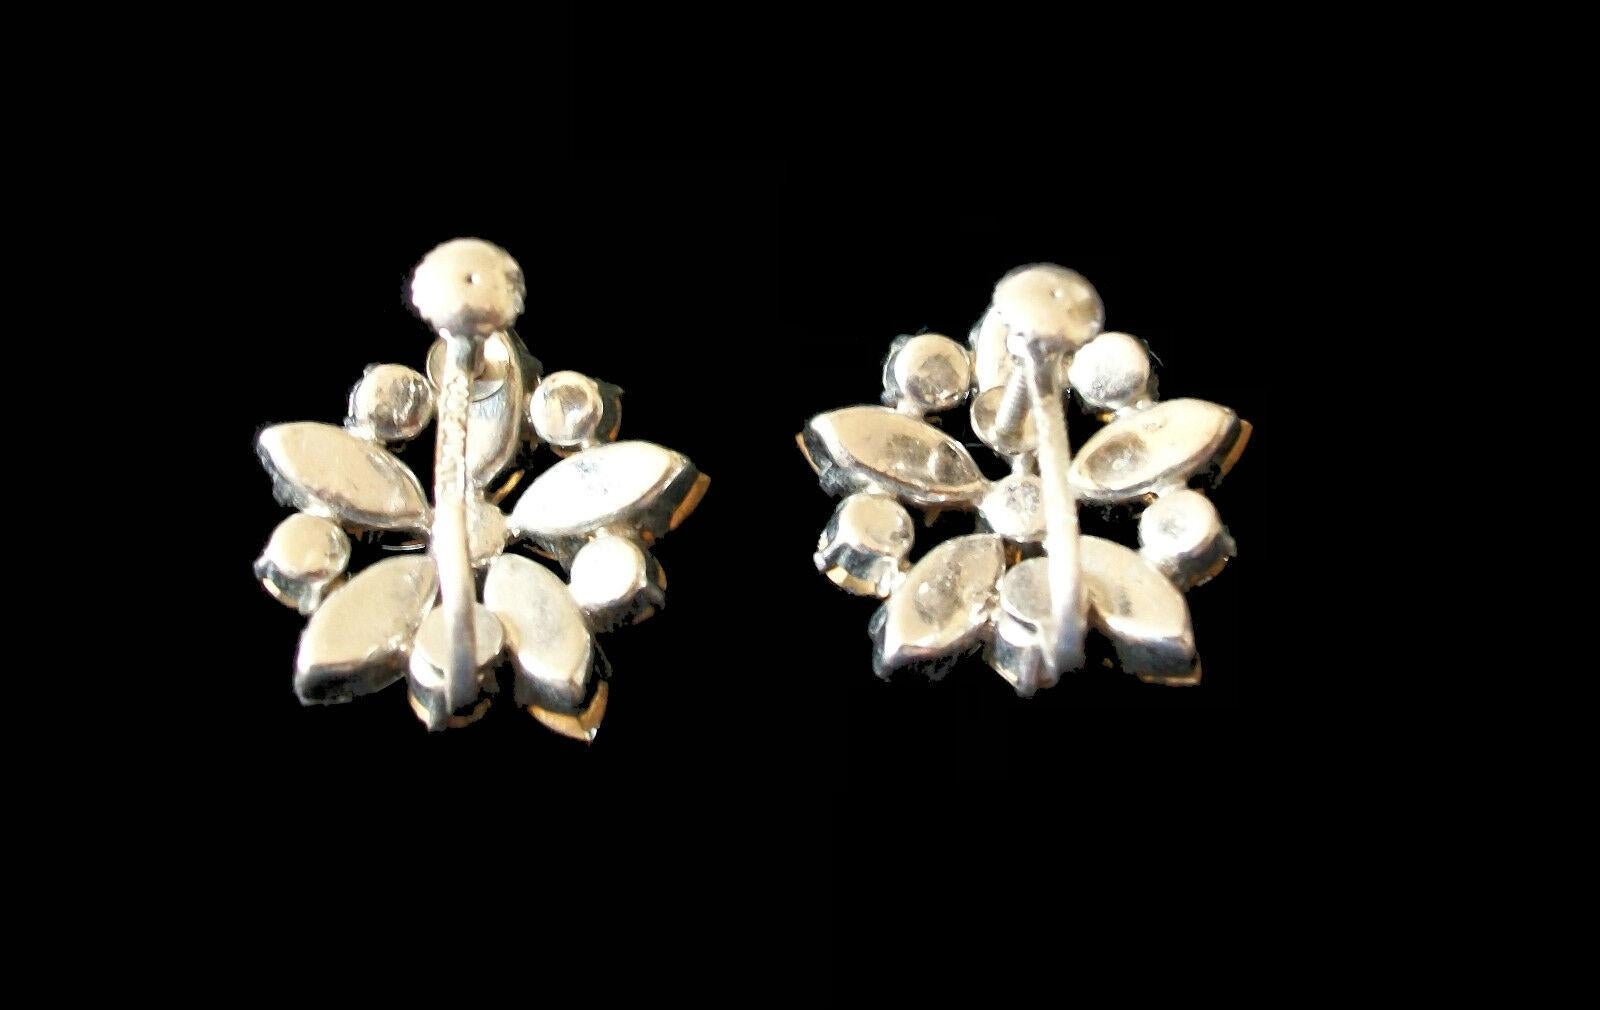 Vintage Austrian Crystal Earrings - Screw Backs - Unsigned - Mid 20th Century For Sale 1